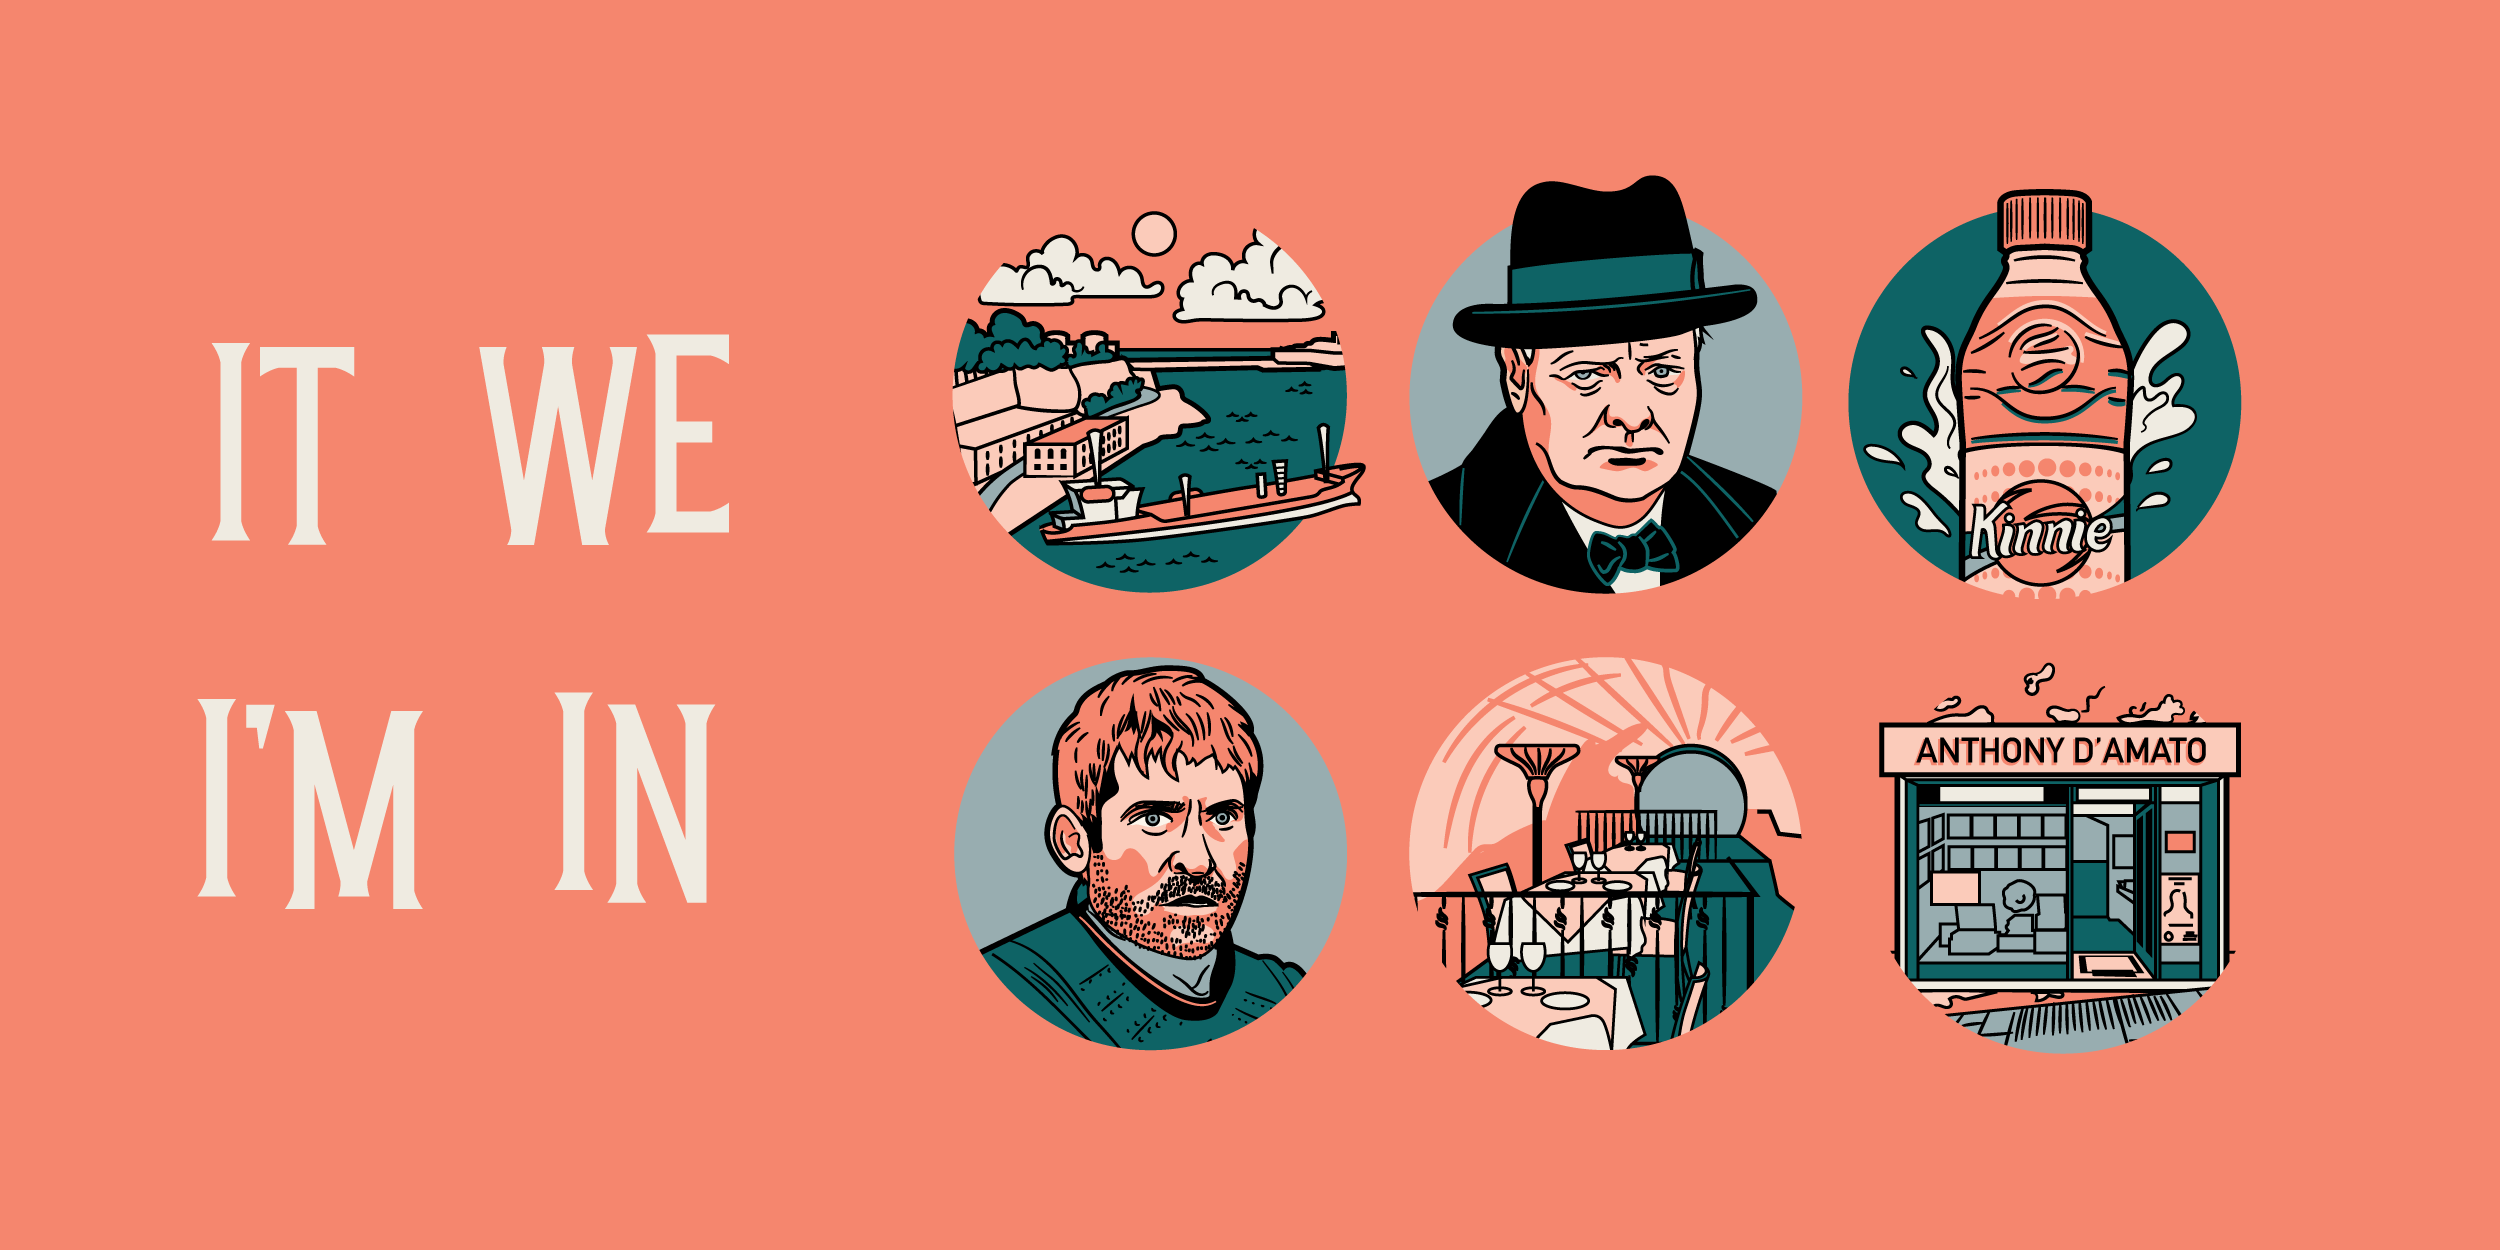 Custom icons for AirBNB featuring Winston Churchill and Jamie Lanister from GOT